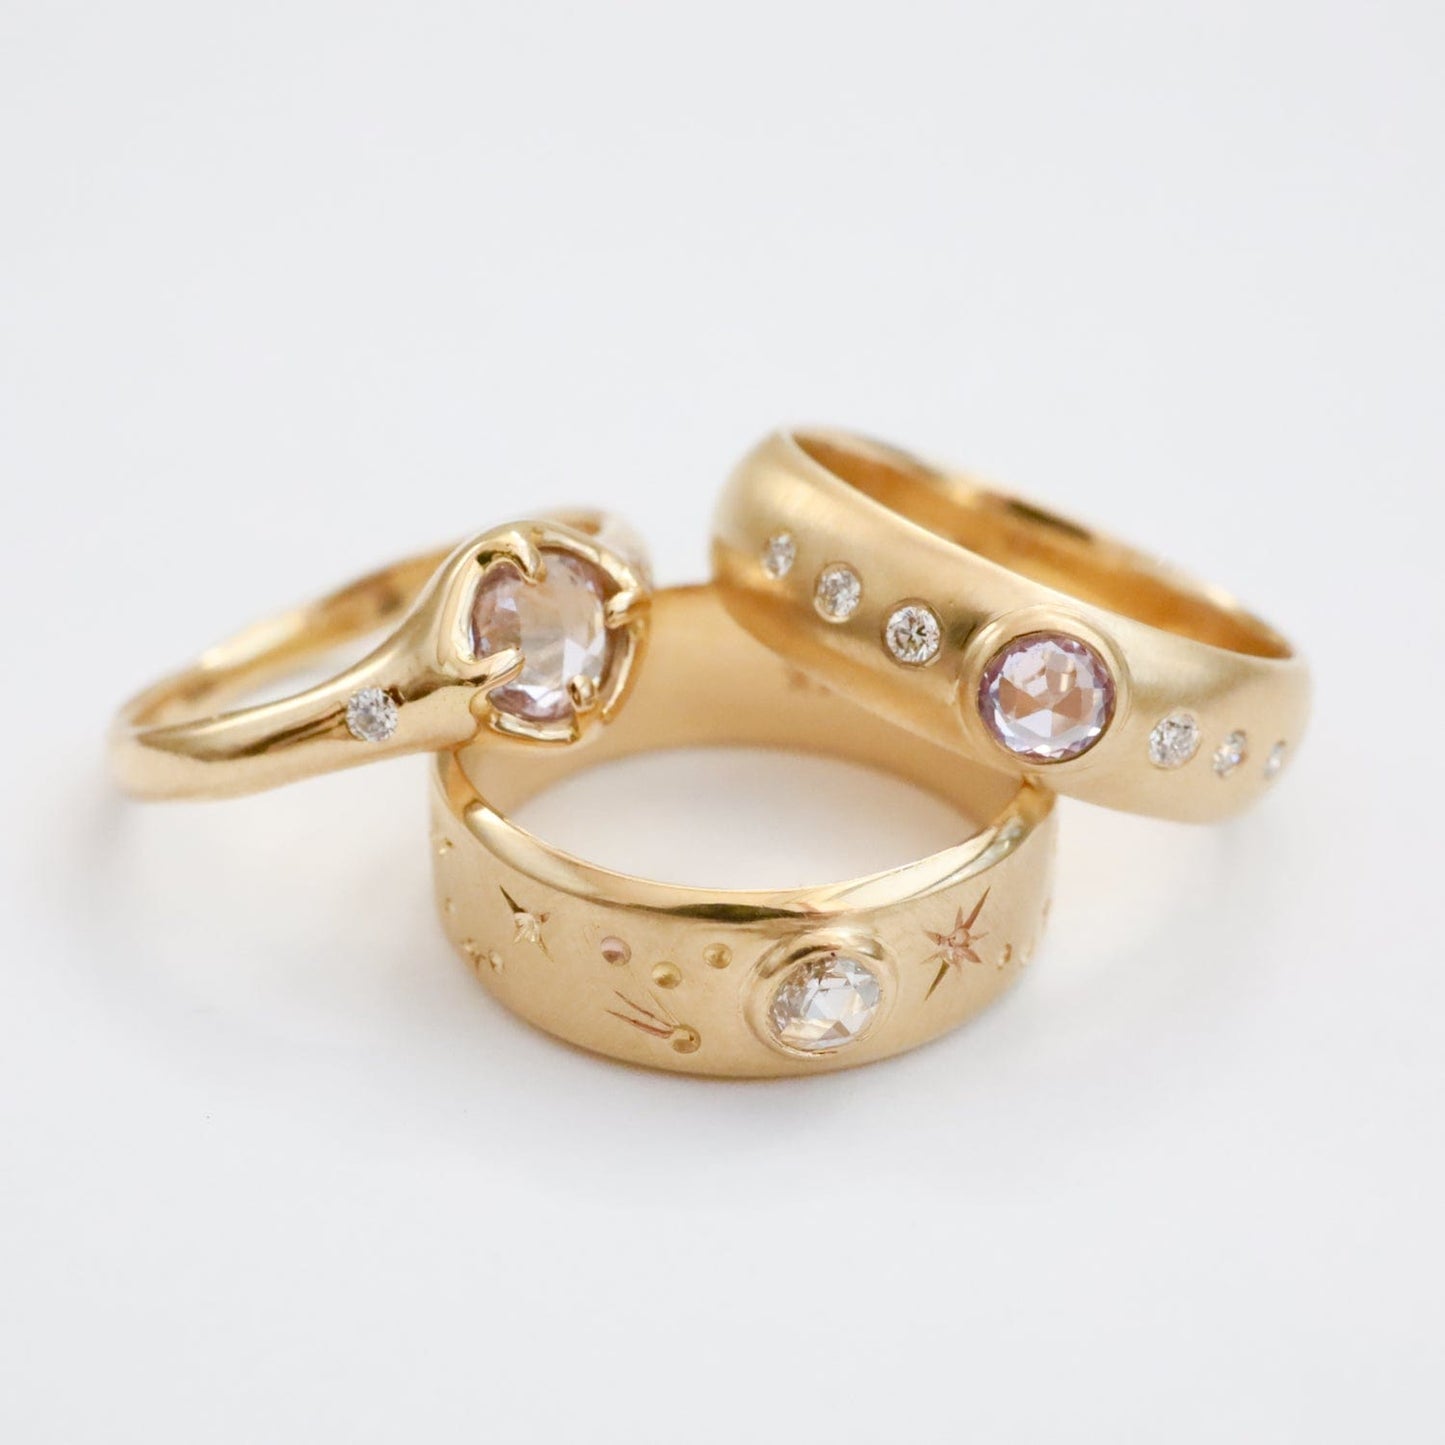 RNG-14K Gold Astraea Ring with White Diamond